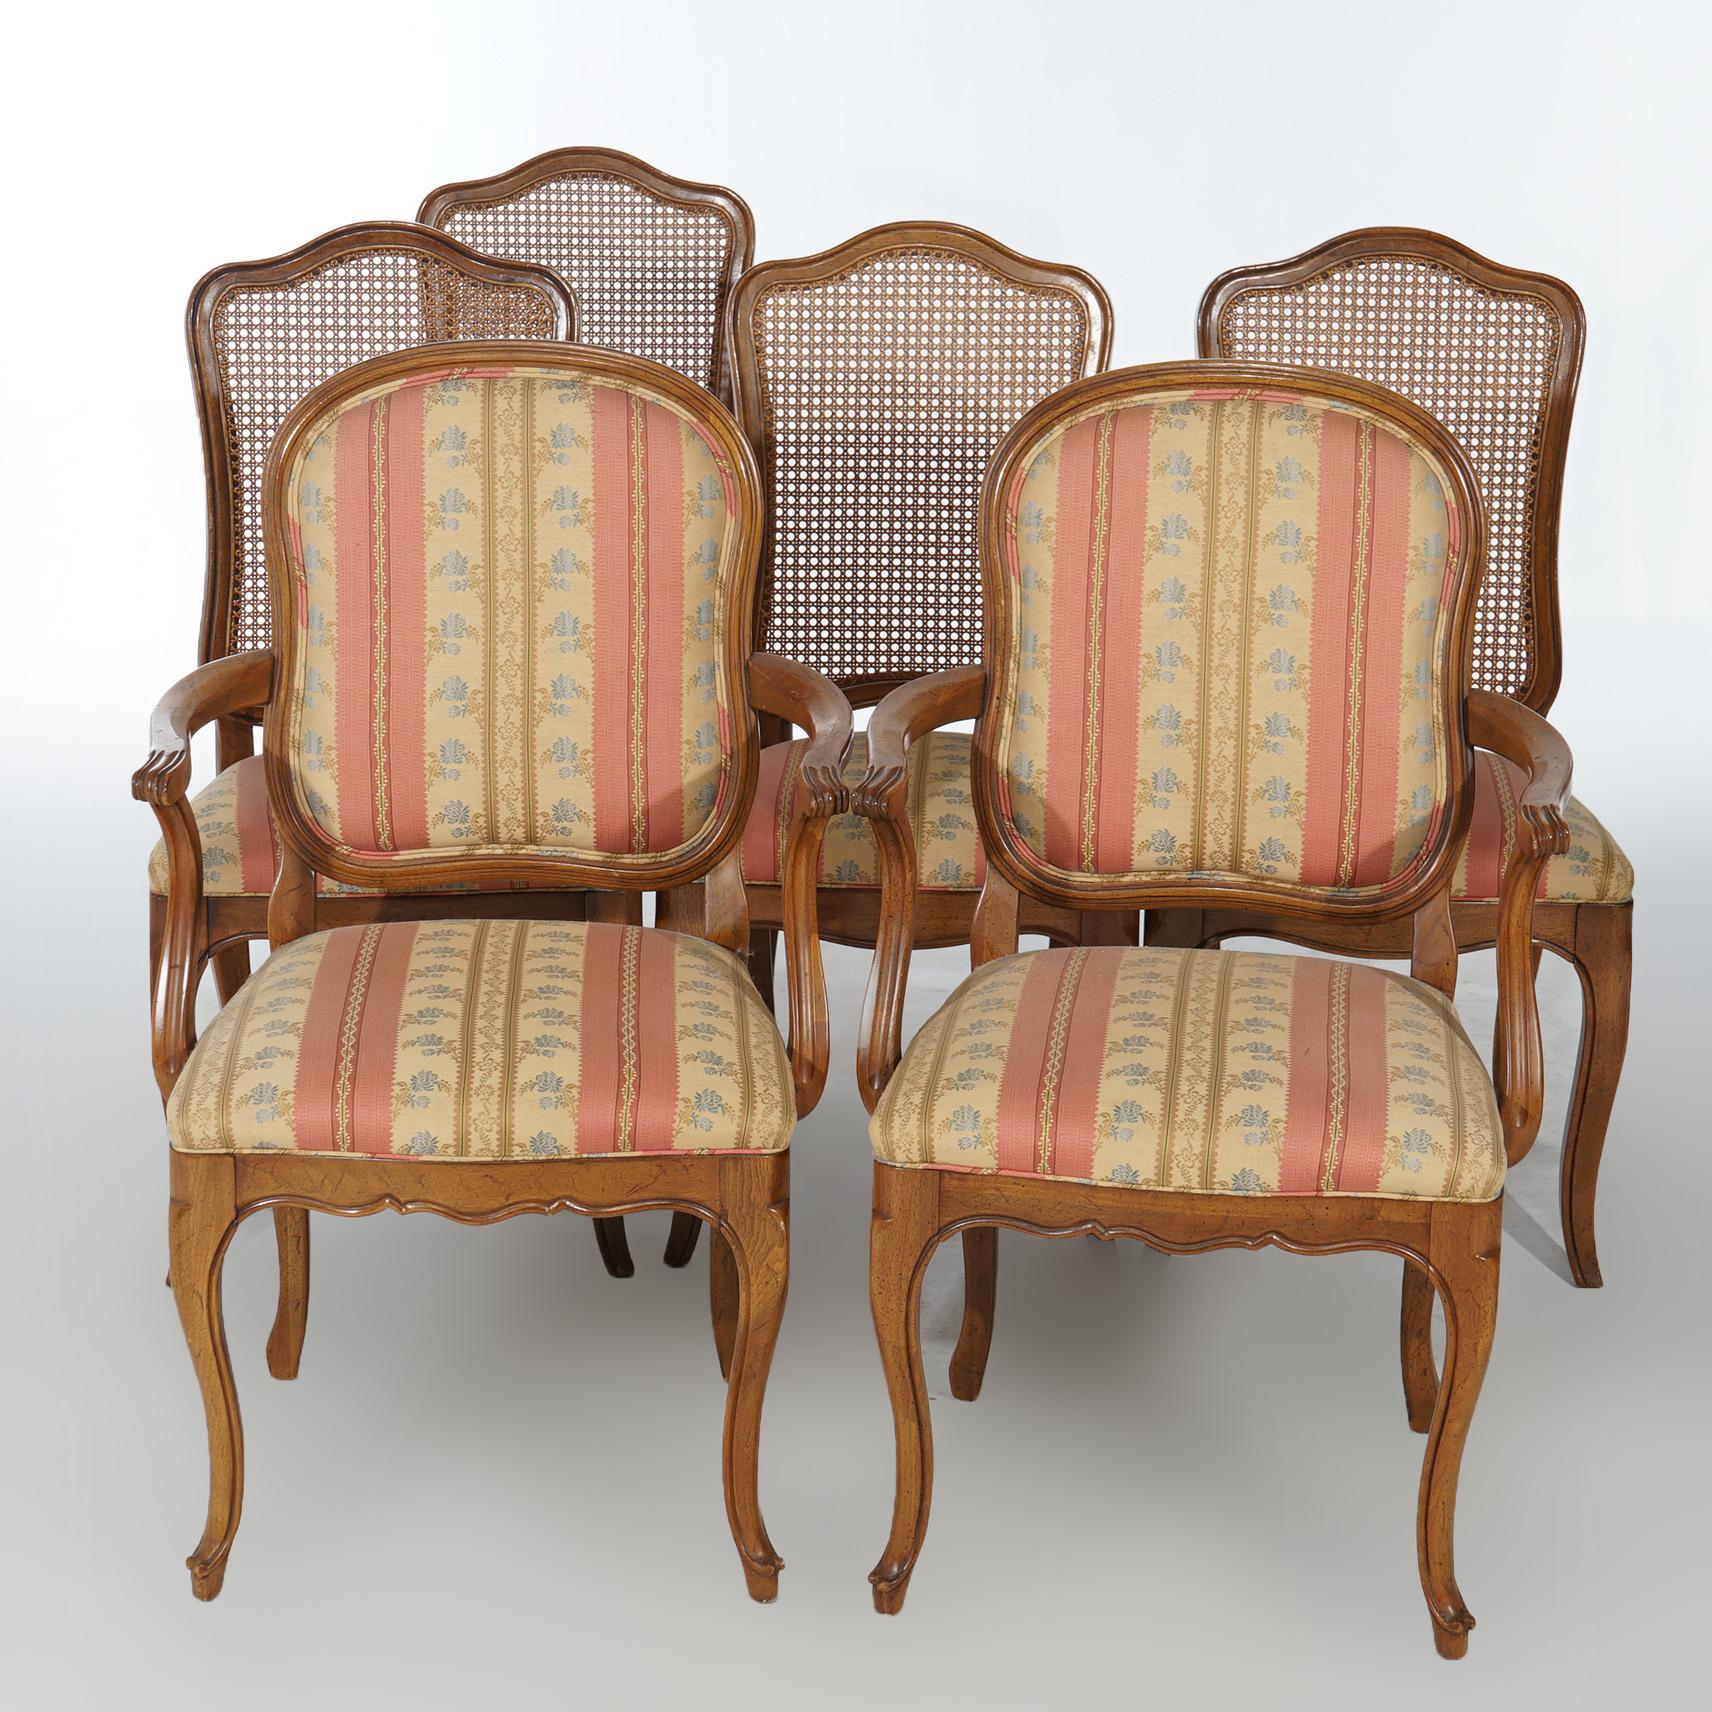 Six French Louis XIV Style Mahogany & Cane Dining Chairs 20th C For Sale 2